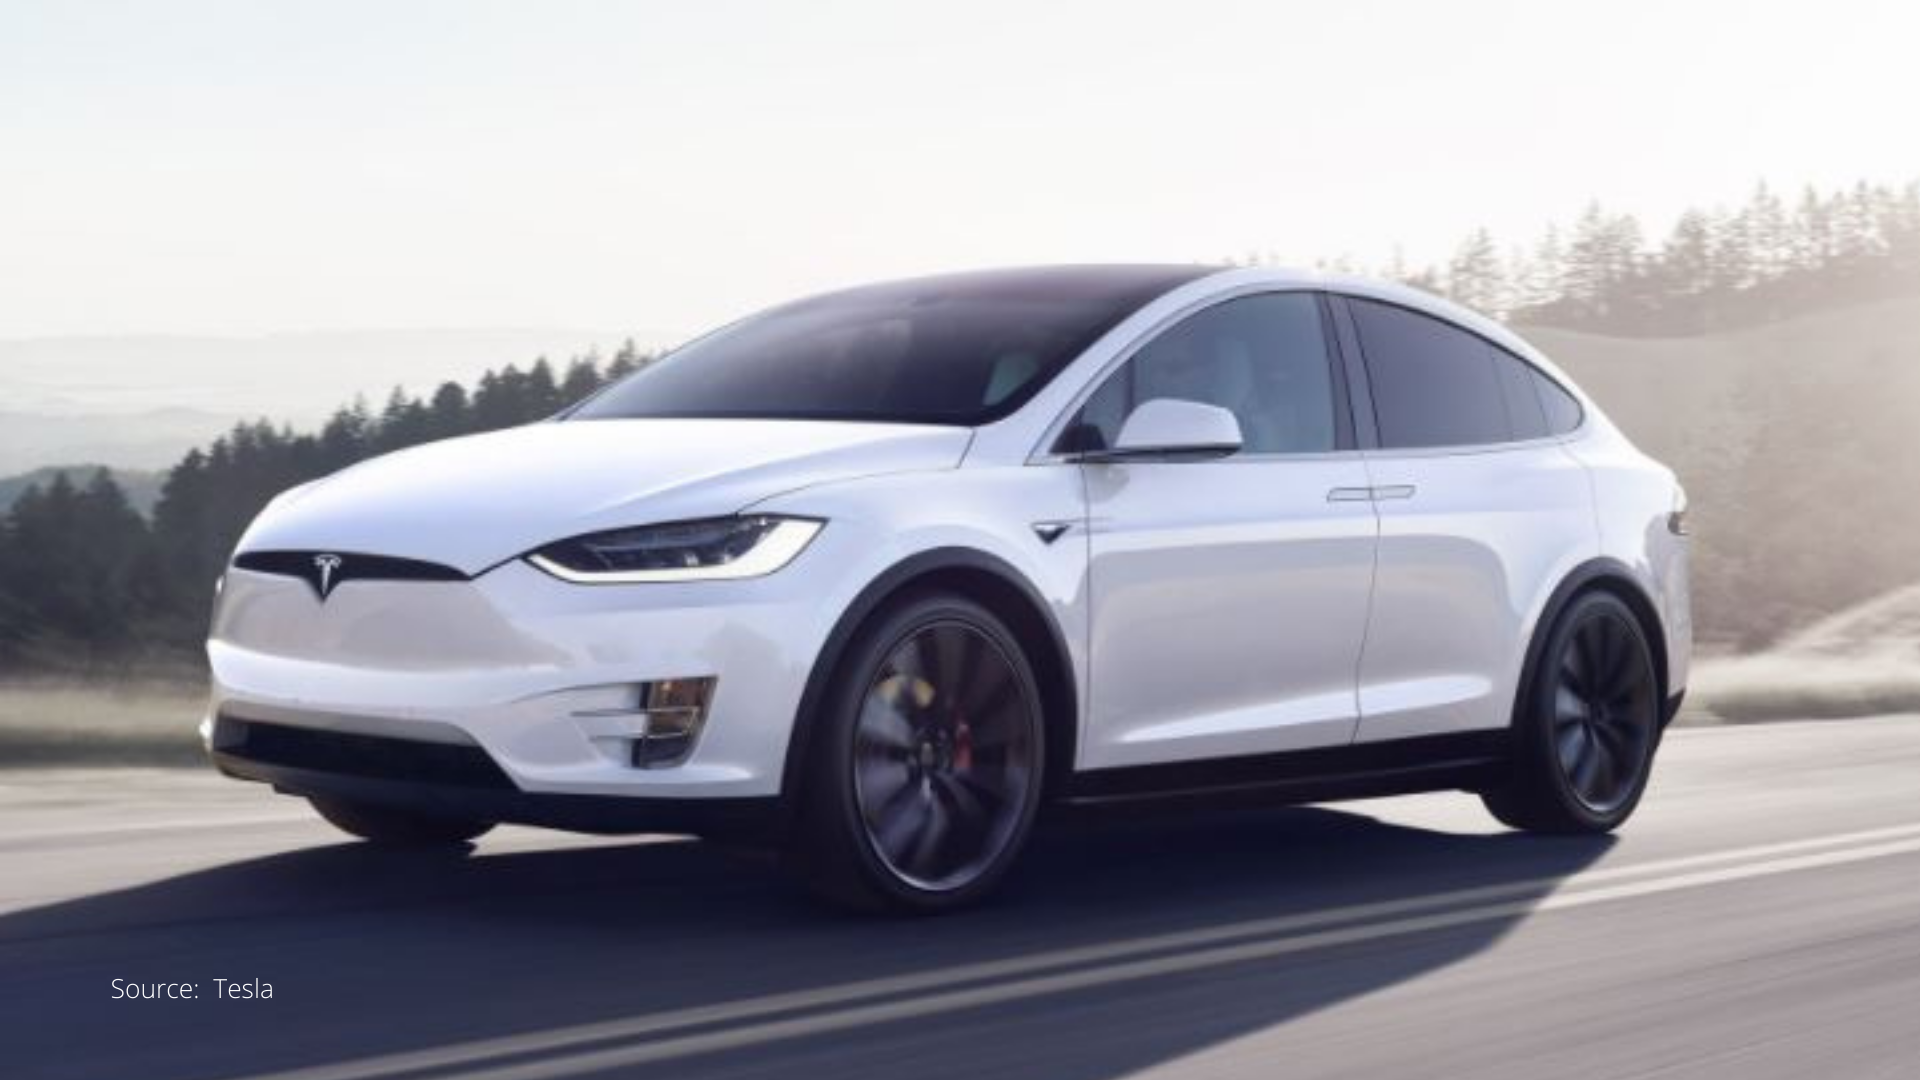 Tesla Delivered Nearly Half a Million Cars in 2020